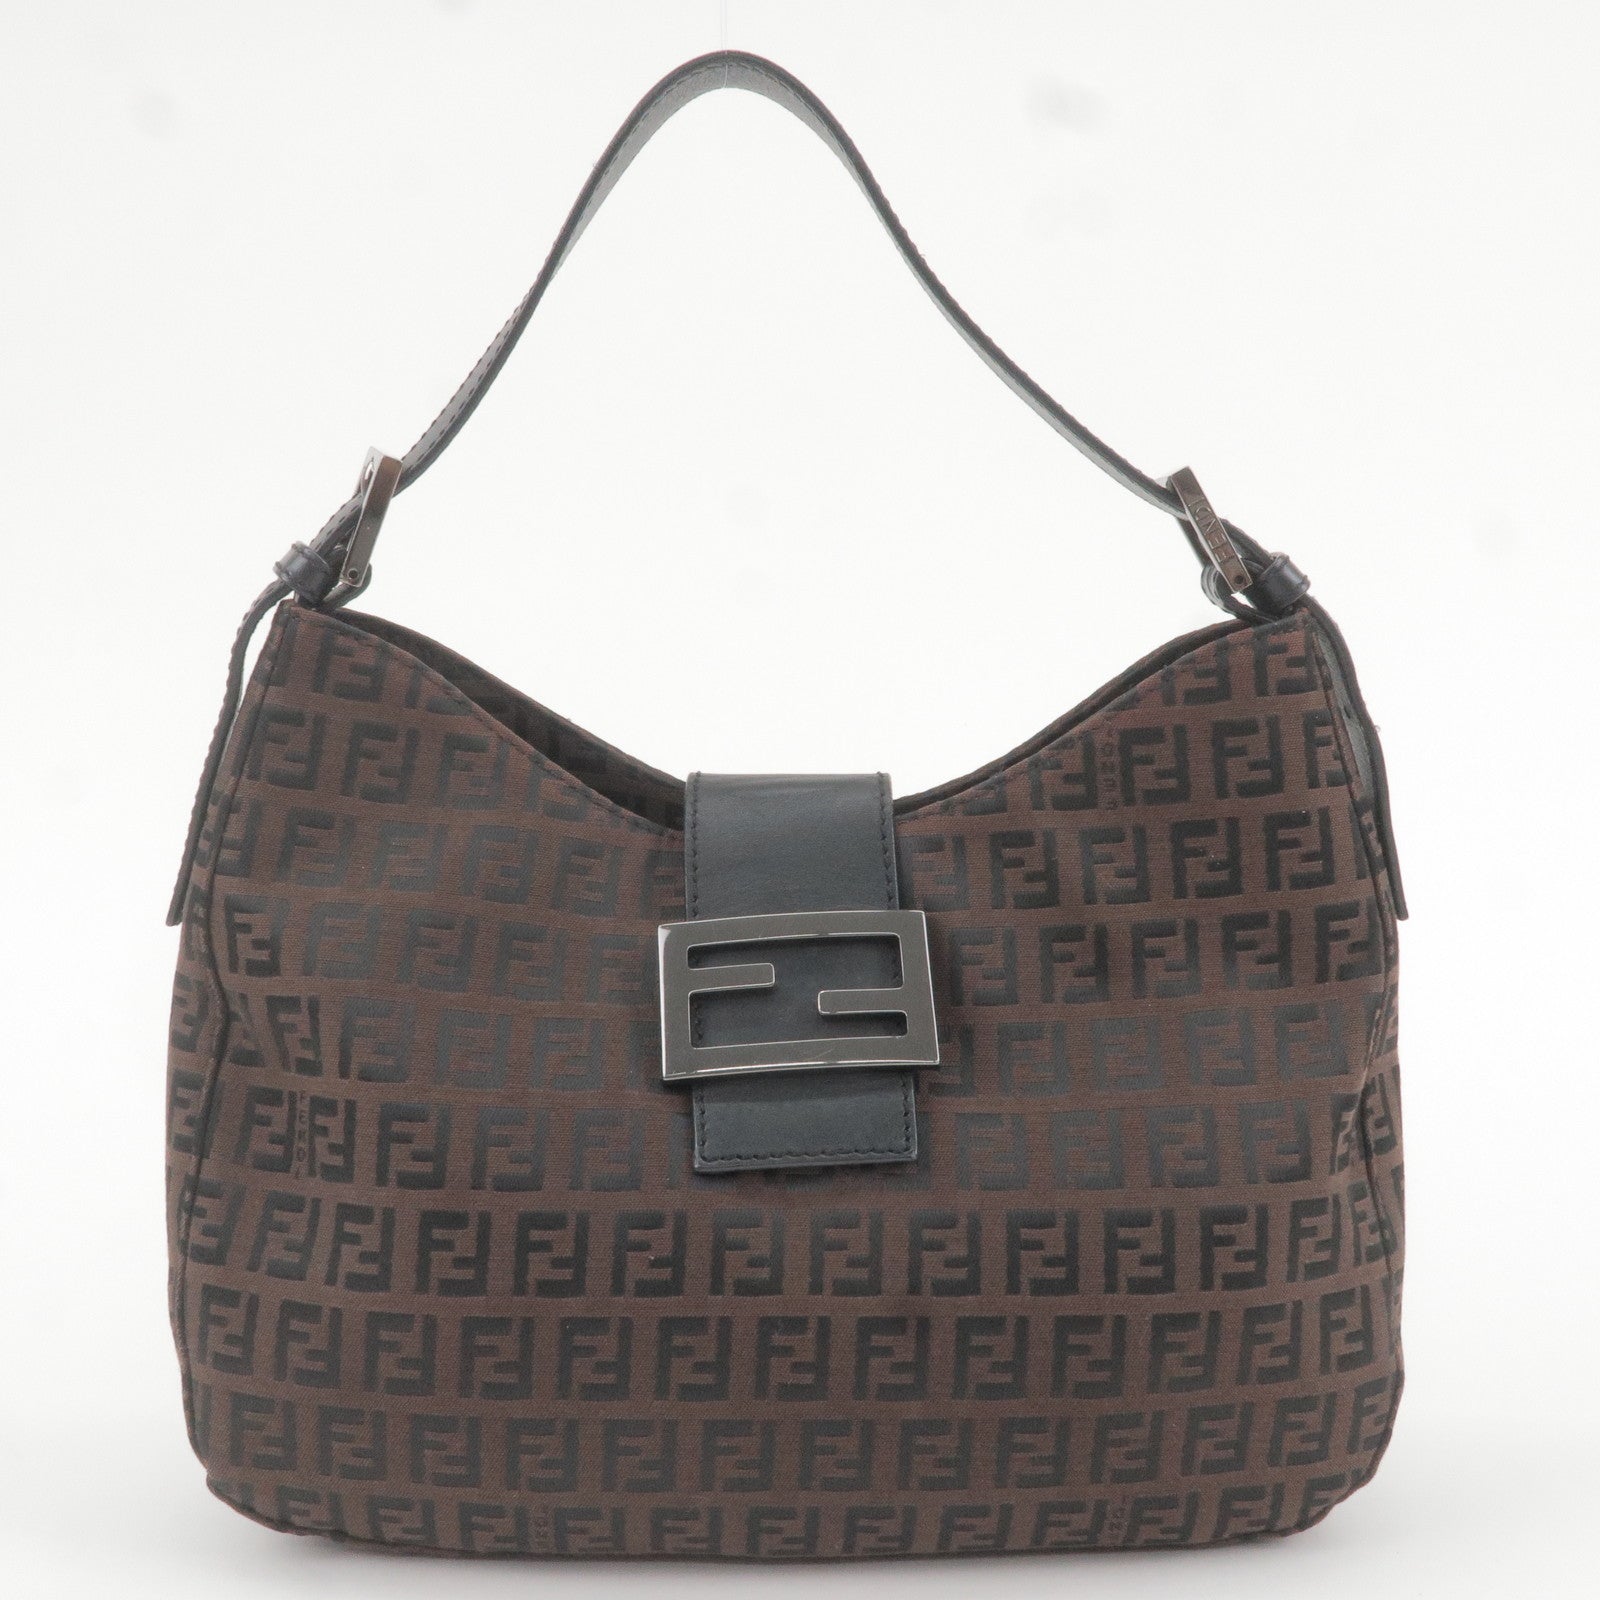 Brown Zucca Canvas and Red Leather Selleria Boston Bag